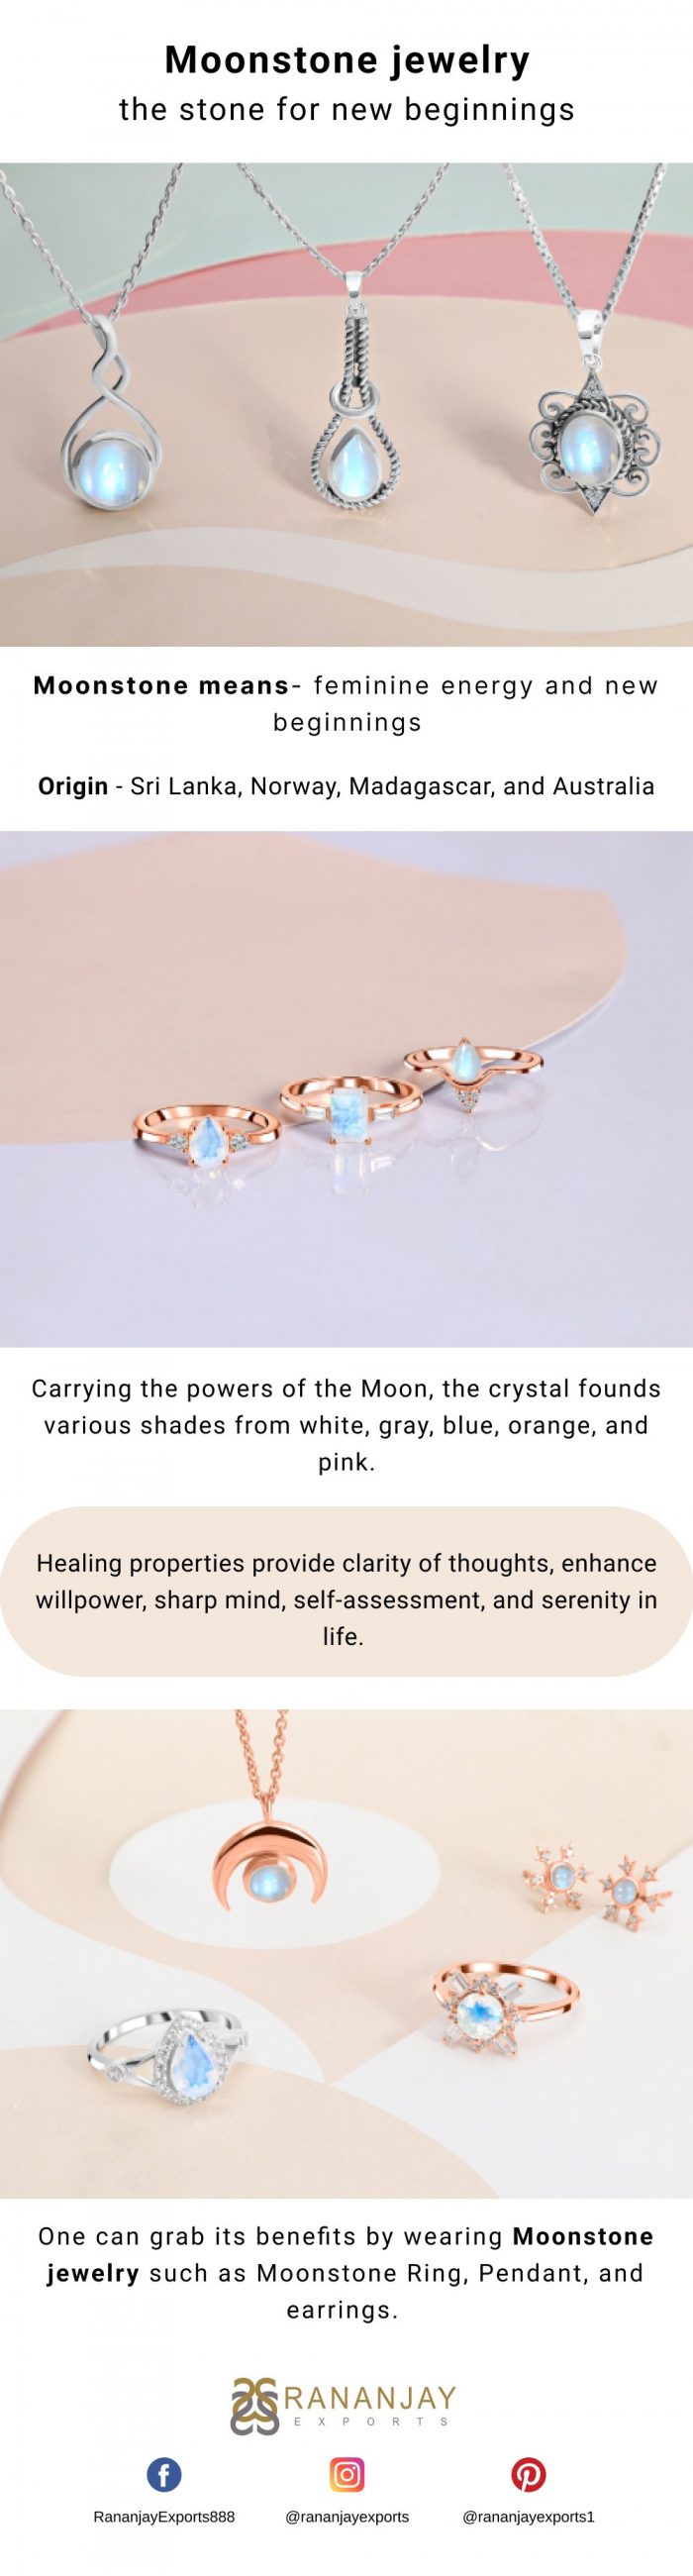 Moonstone jewelry- The Stone for New Beginning